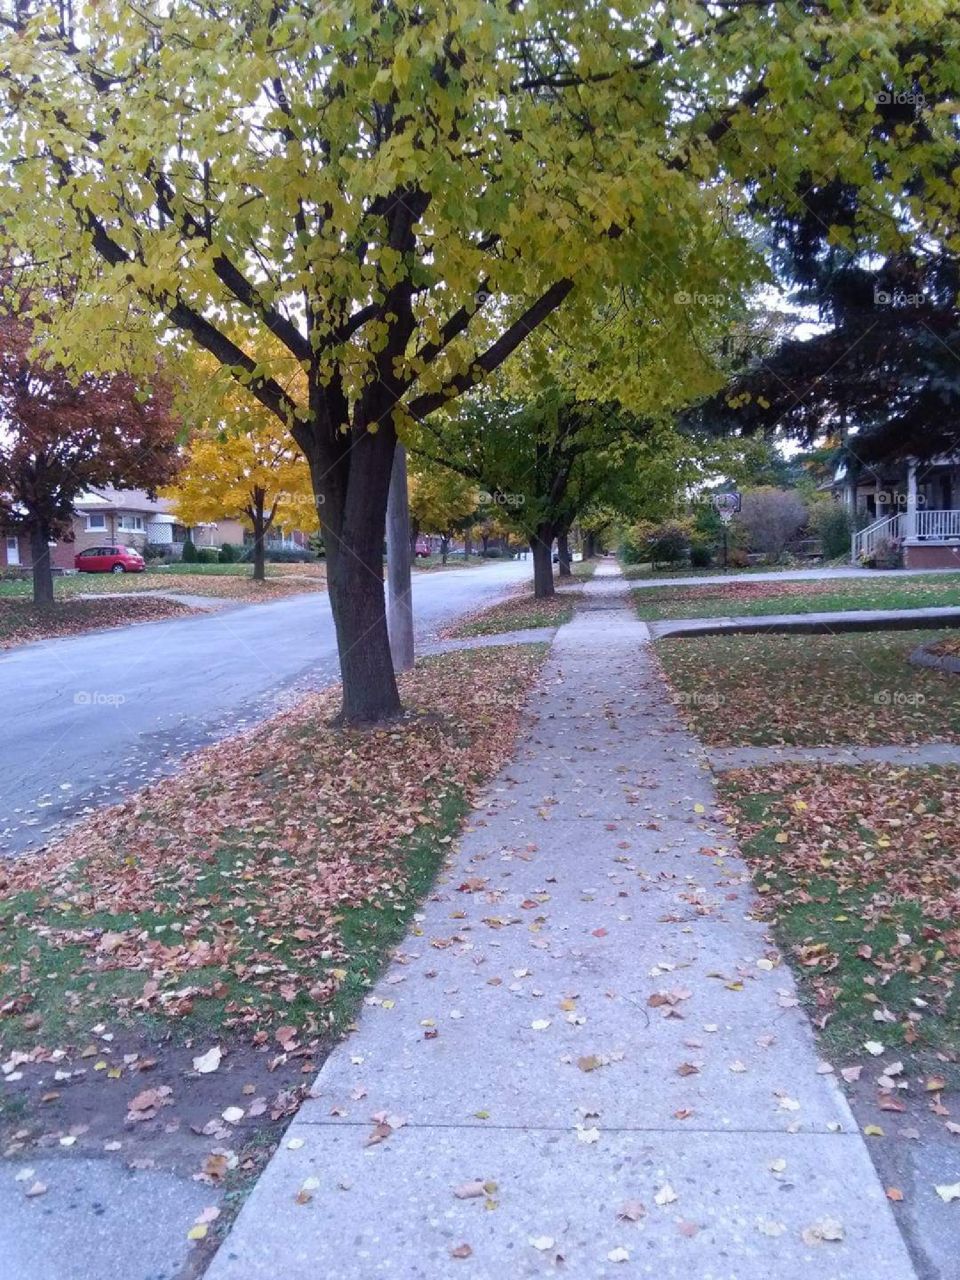 Going for a walk in the fall. leaves changing colors.